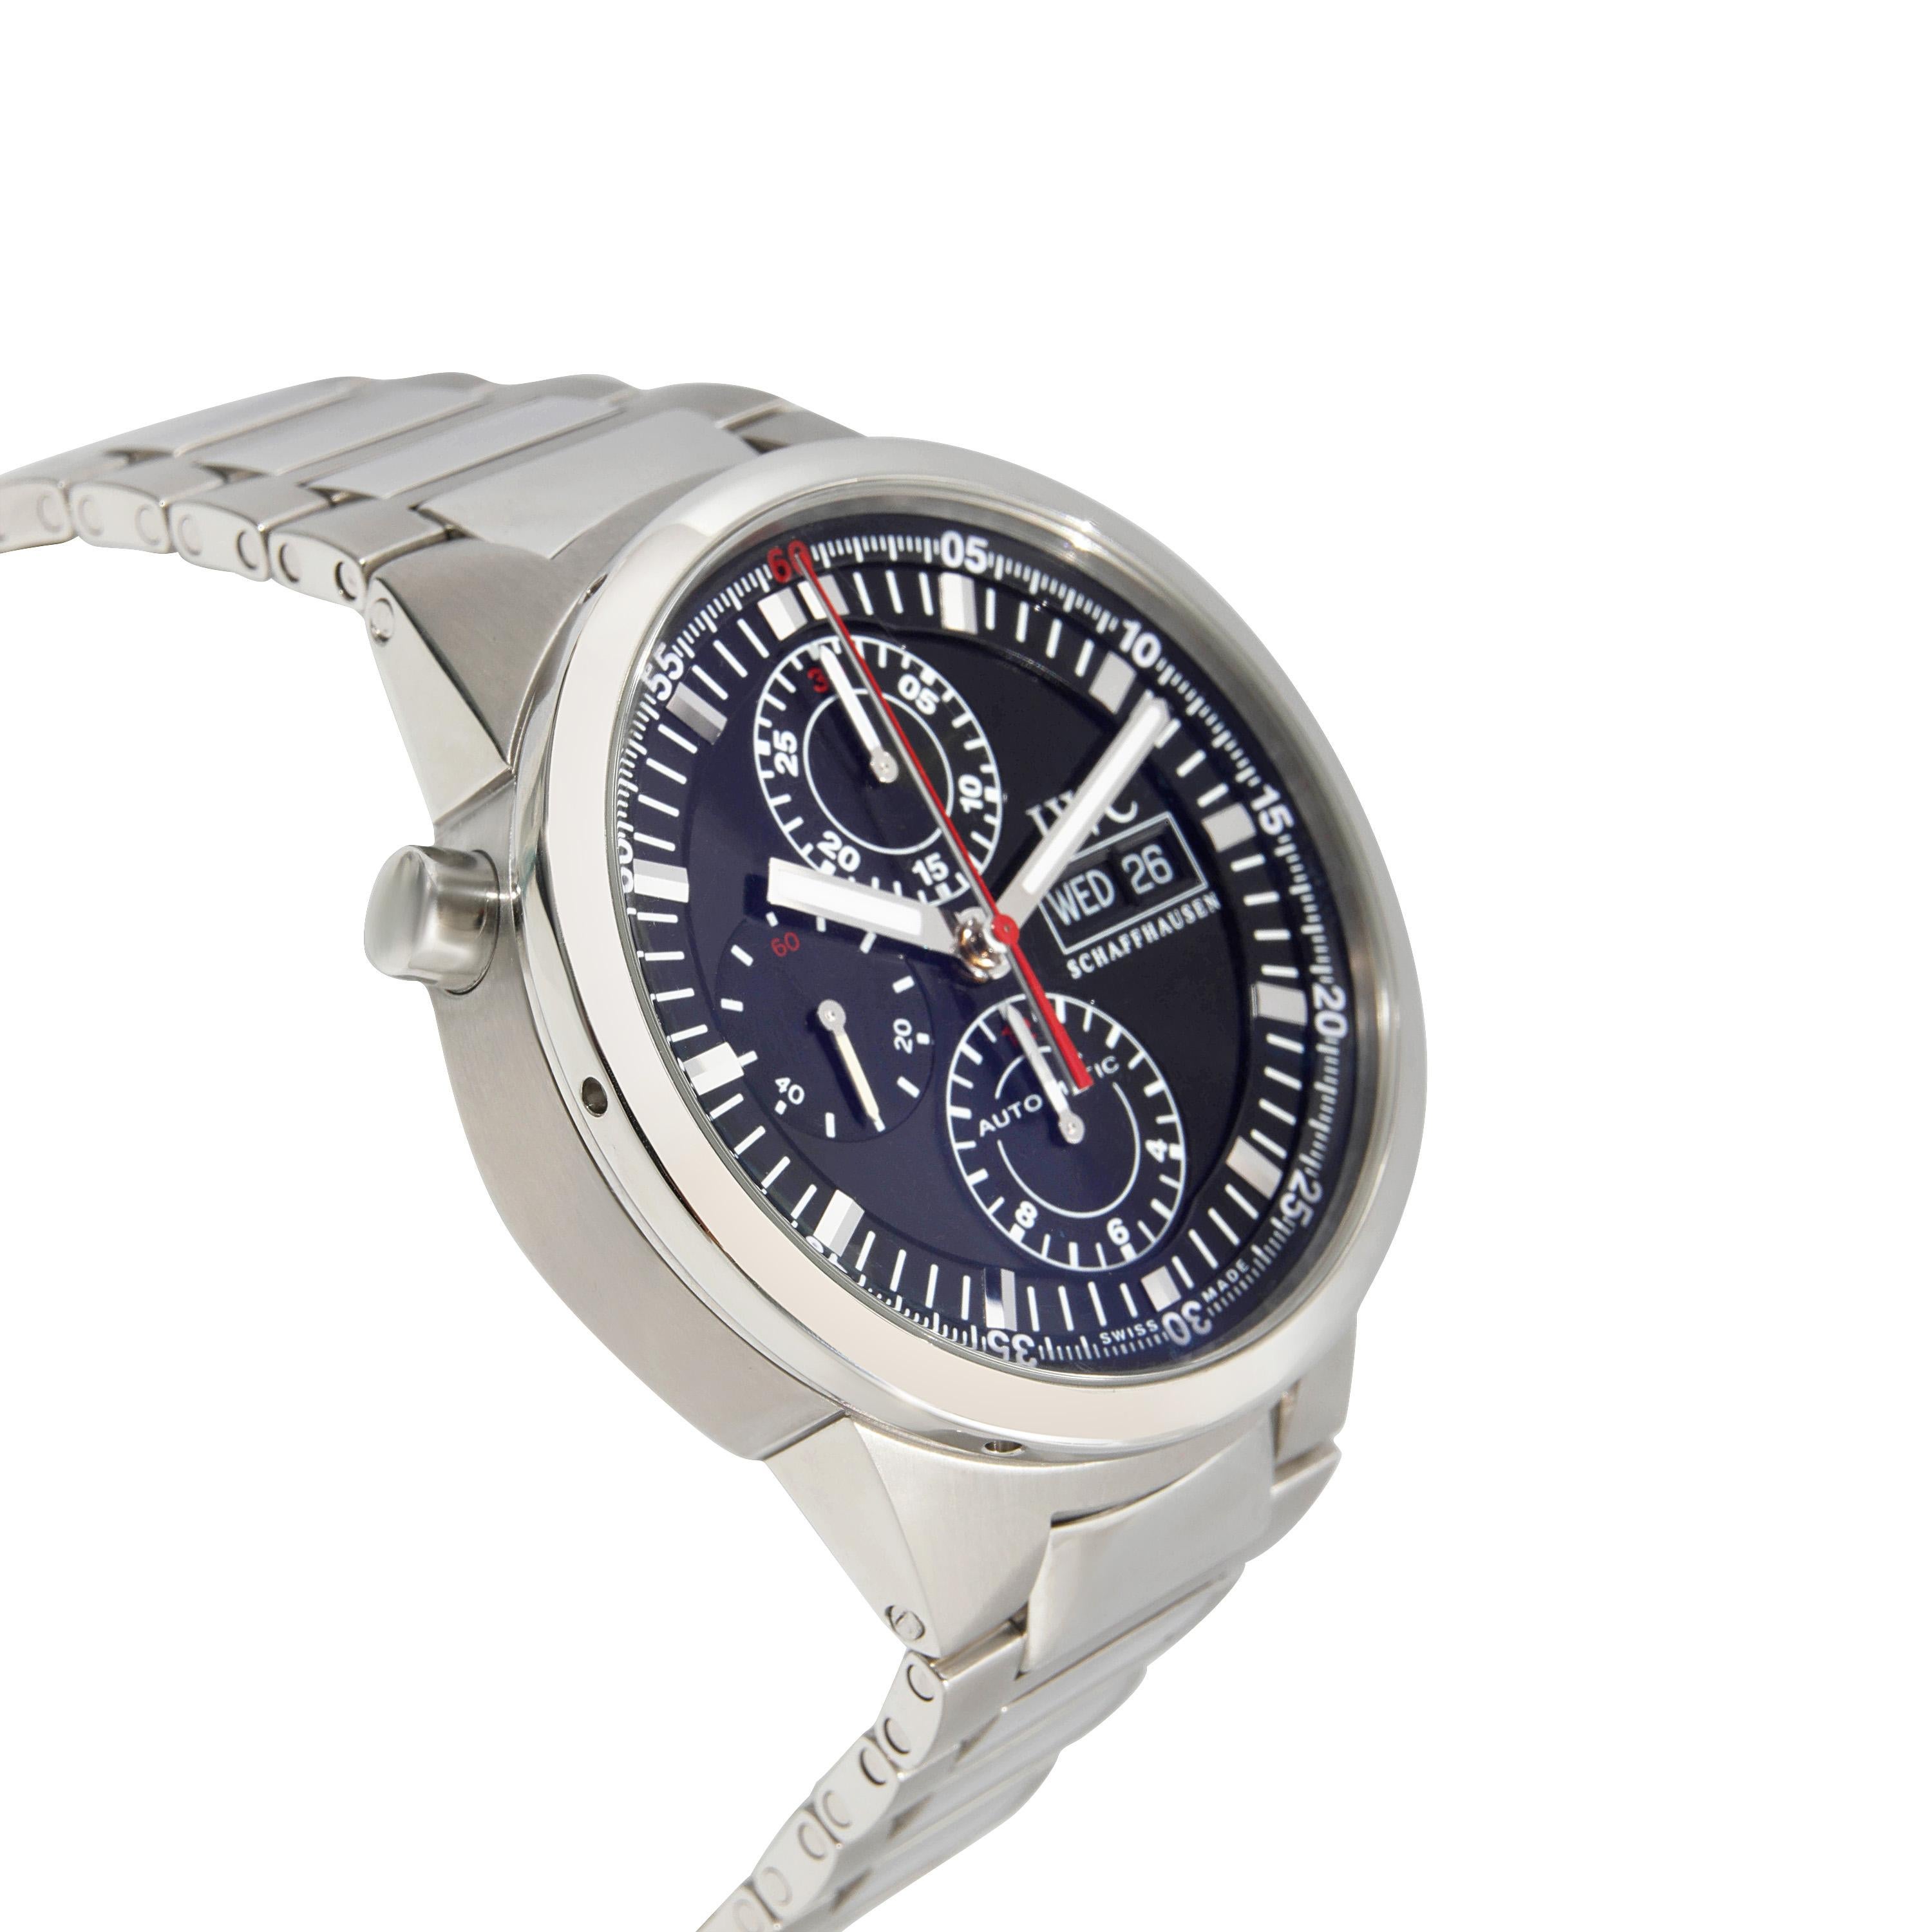 IWC GST Rattrapante IW371518 Men's Watch in  Stainless Steel

SKU: 128911

PRIMARY DETAILS
Brand: IWC
Model: GST Rattrapante
Country of Origin: Switzerland
Movement Type: Mechanical: Automatic/Kinetic
Year of Manufacture: 2010-2019
Condition: Retail